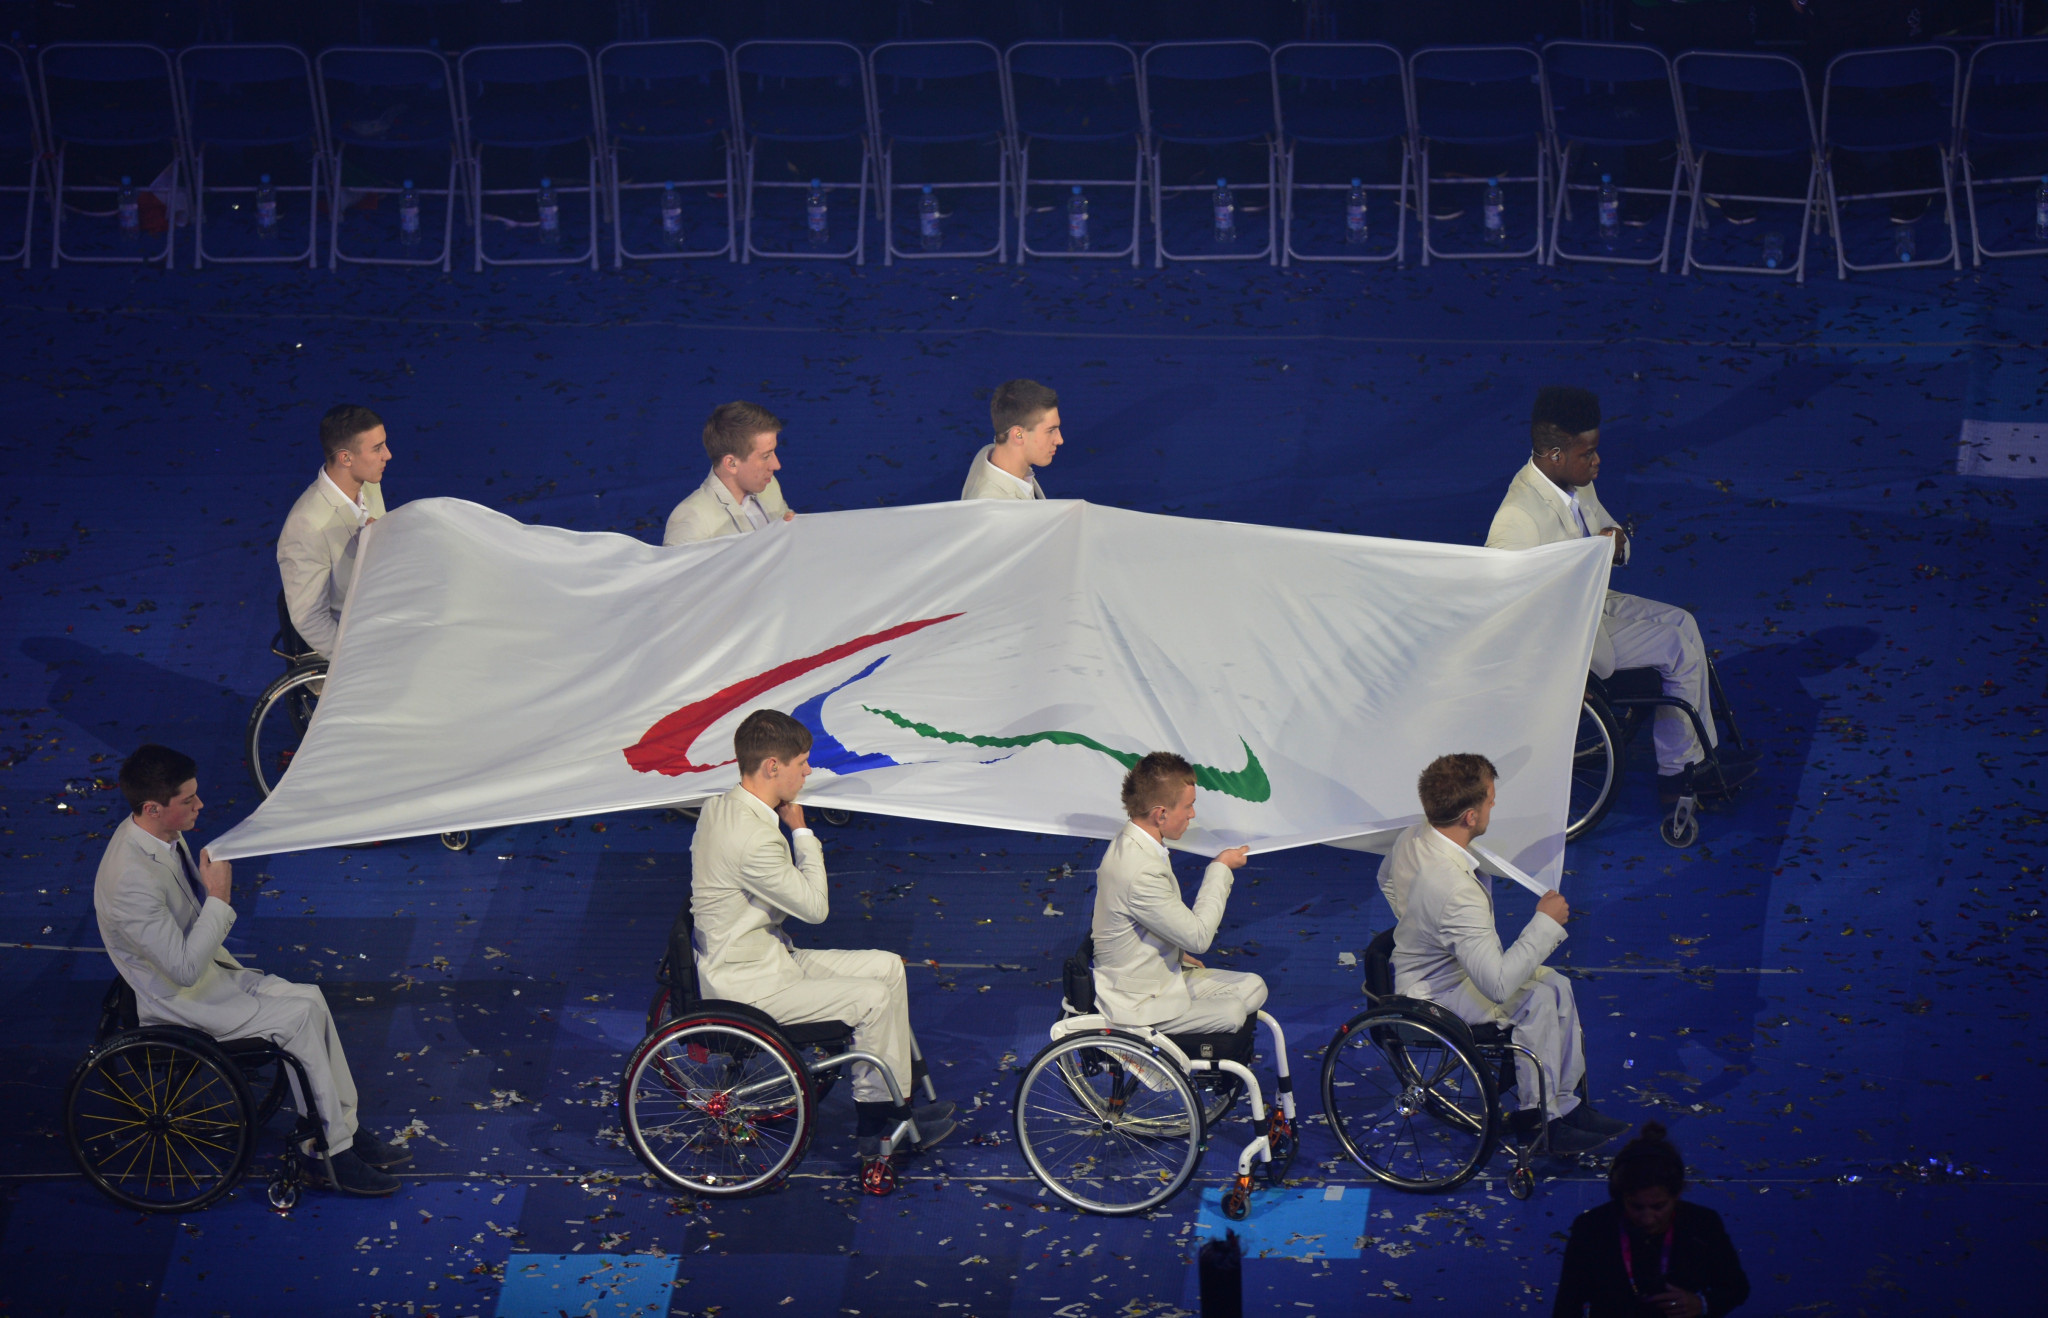 The Paralympic Flag is carried to be raised during the opening ceremony of the London 2012 Paralympic Games at the Olympic Stadium in east London on August 29, 2012 ©Getty Images